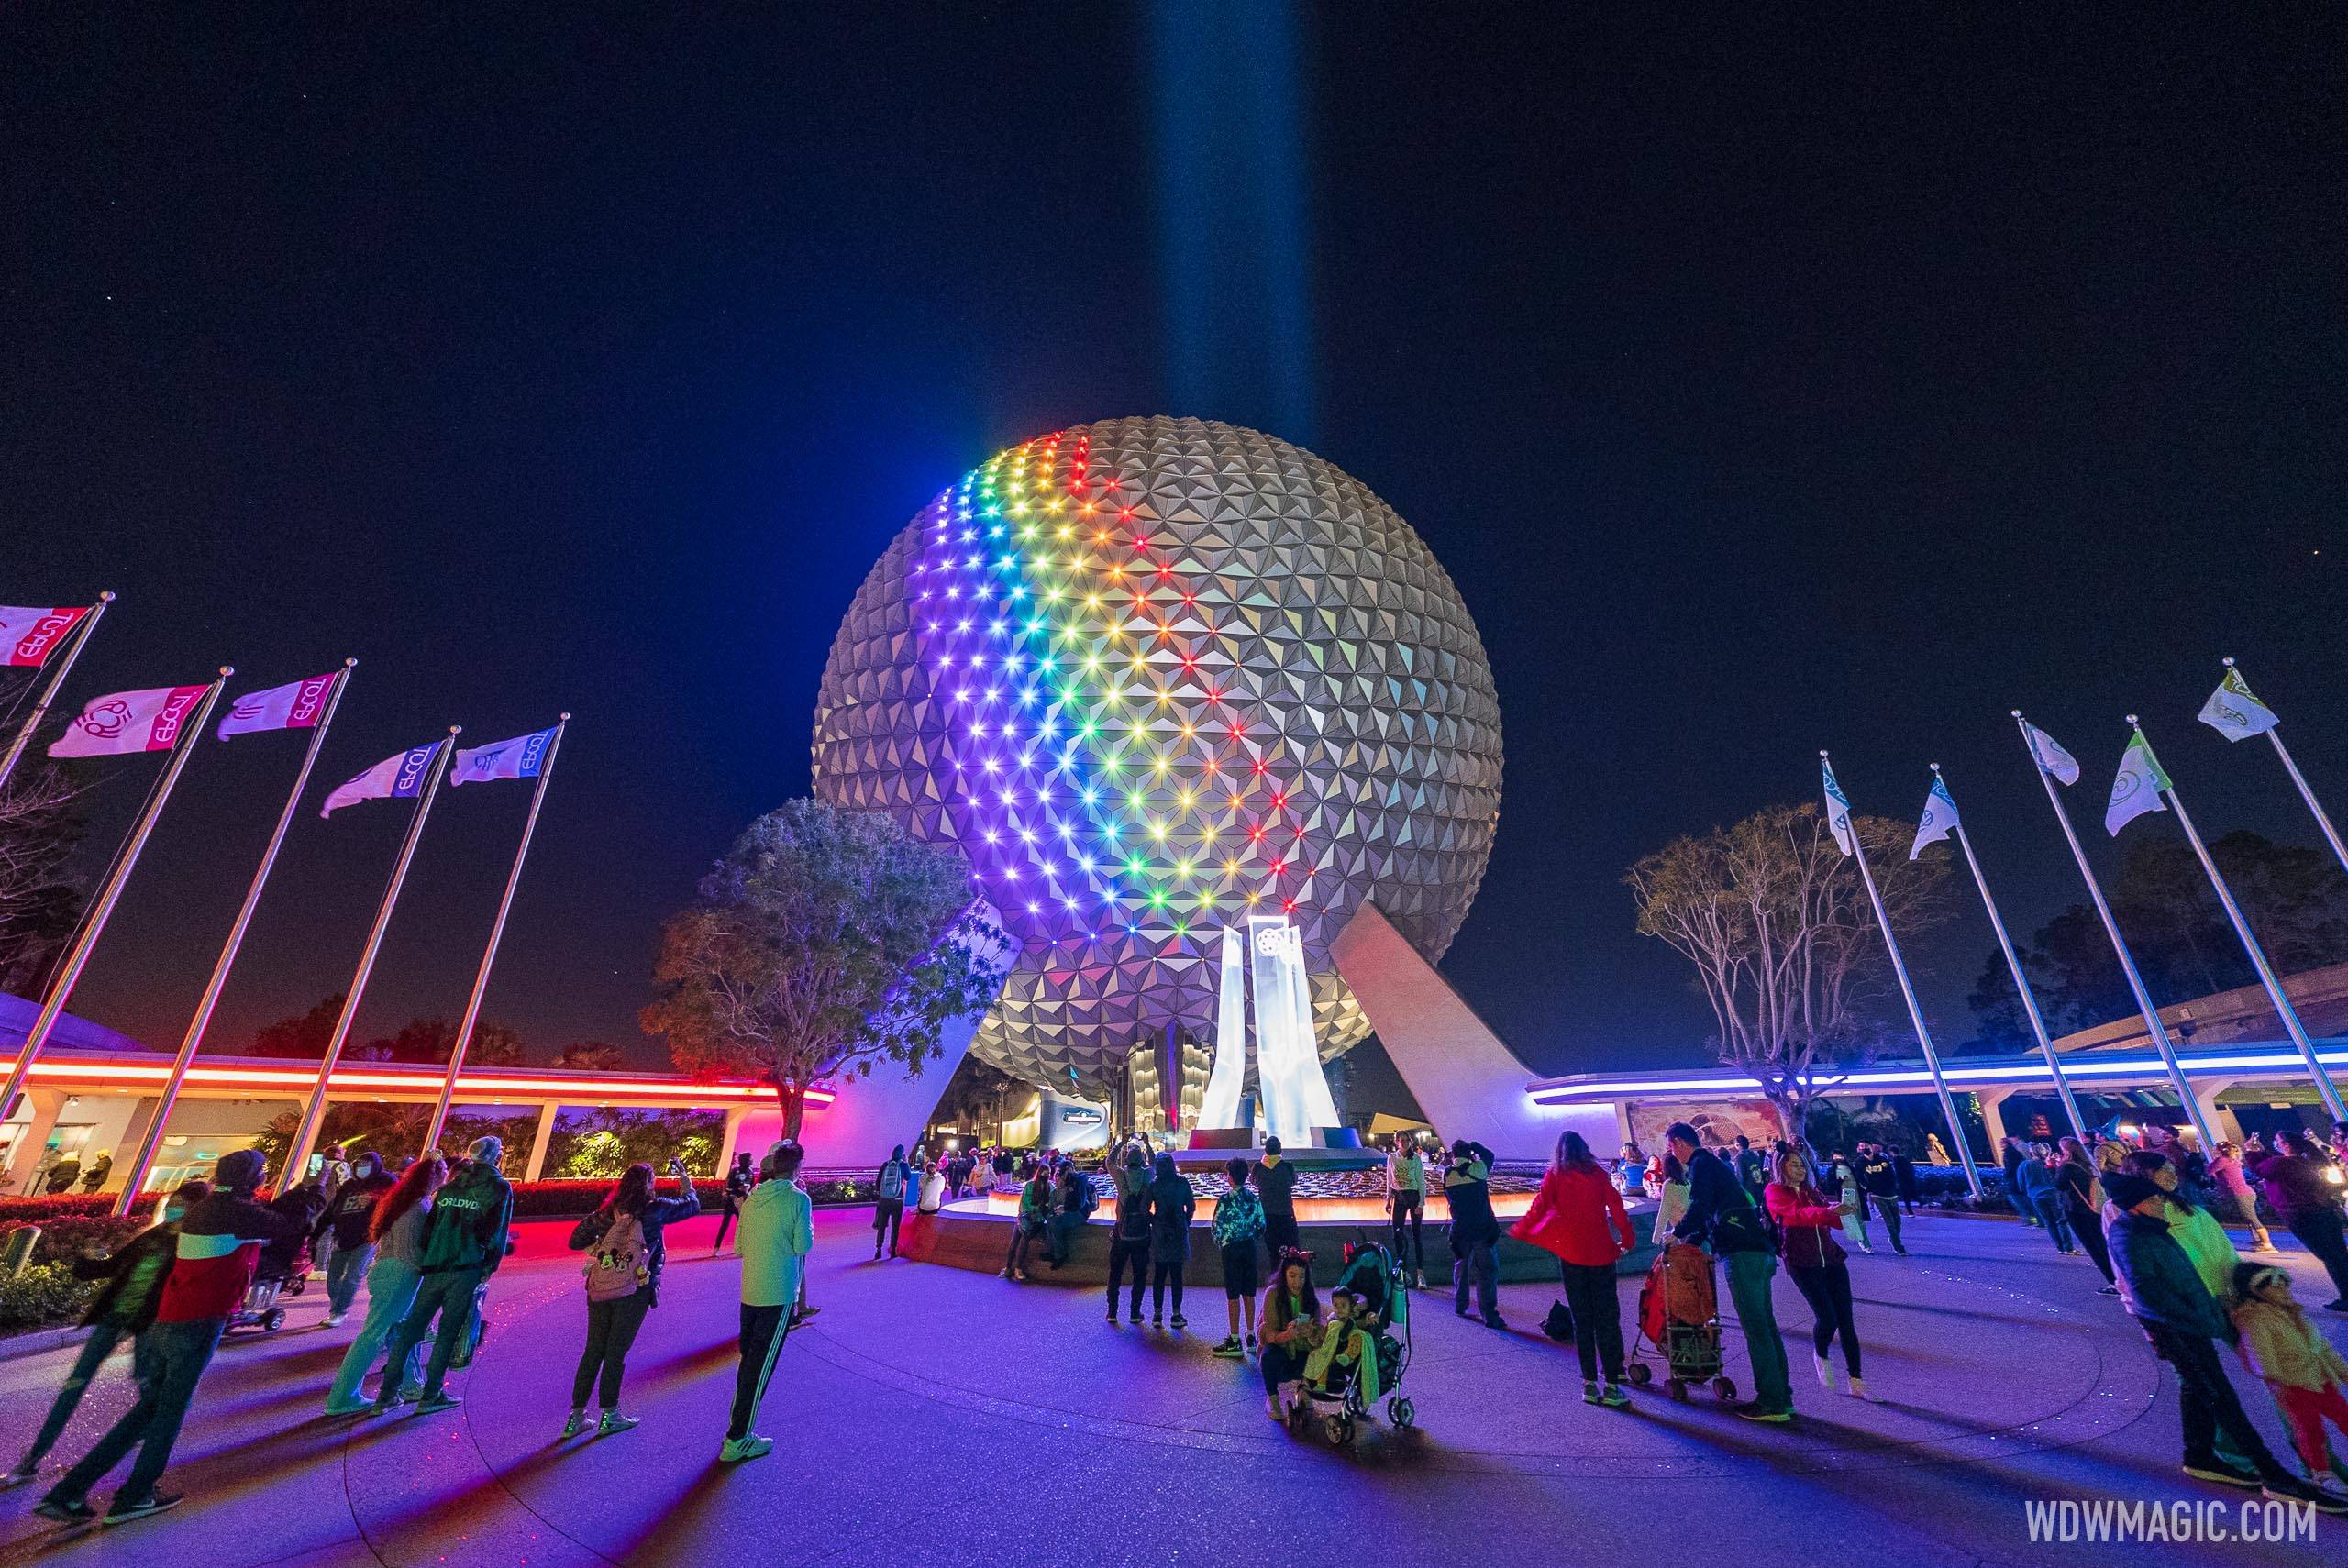 Video of the new Muppets 'Rainbow Connection' lighting design at EPCOT's Spaceship Earth